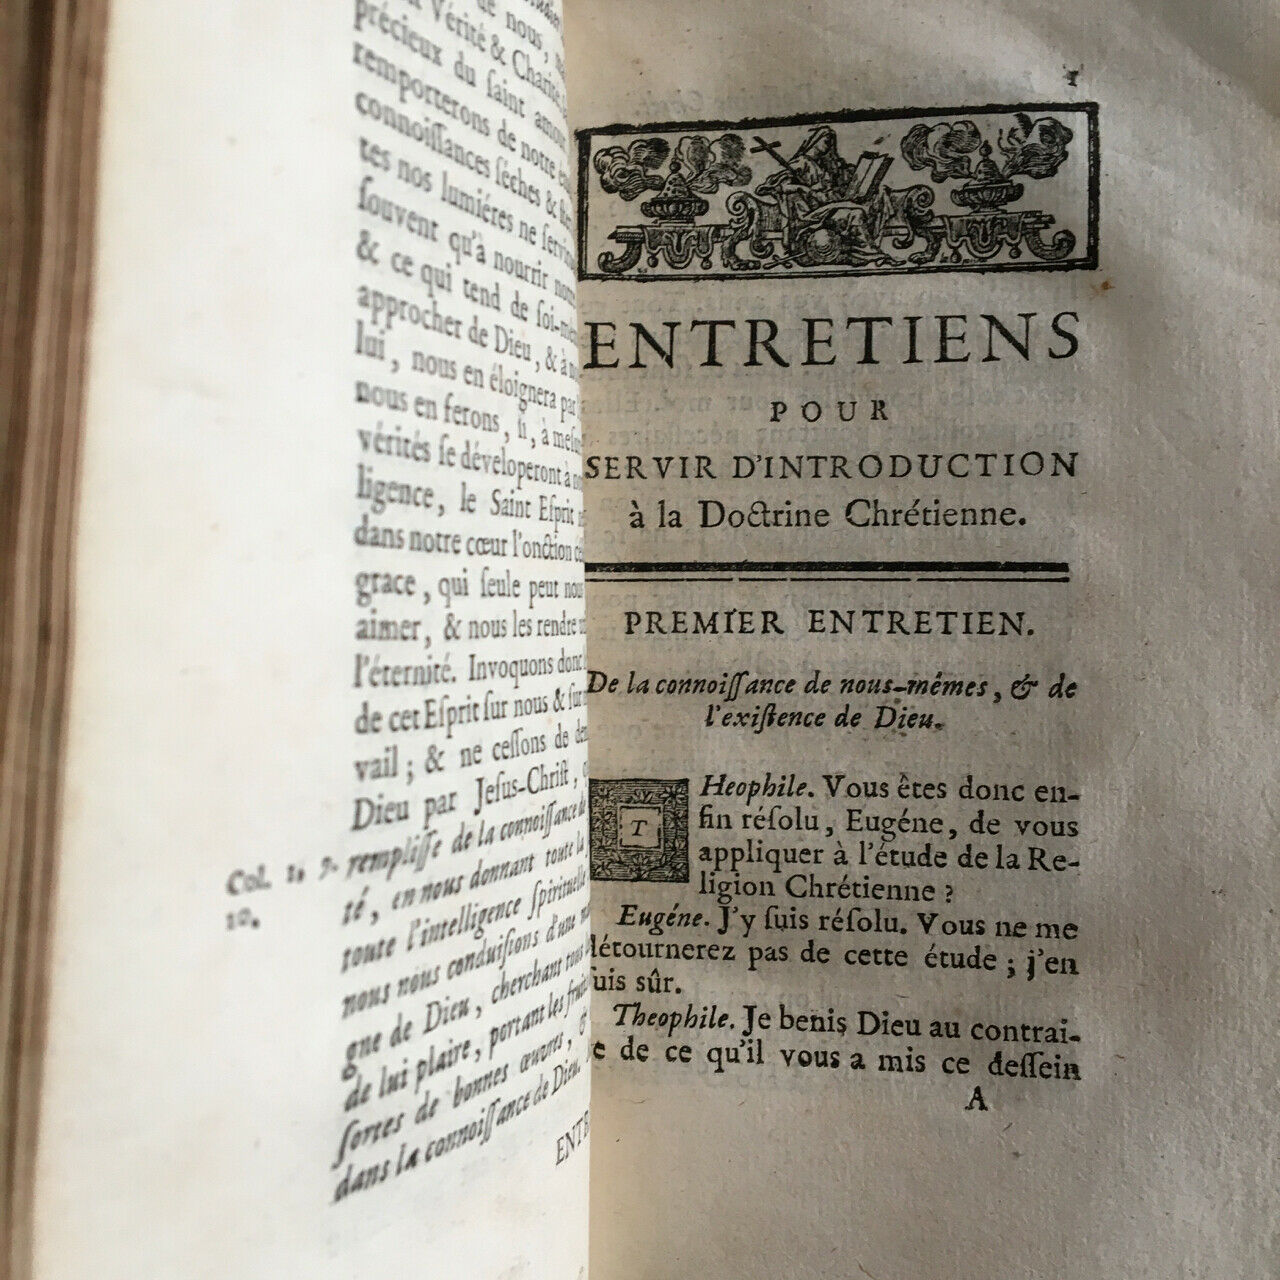 François-Philippe Mésenguy (1677-1763) — Exposition of Christian doctrine, or instructions on the principal truths of Religion — complete in 4 volumes — rare first edition — At the expense of the company — 1744.